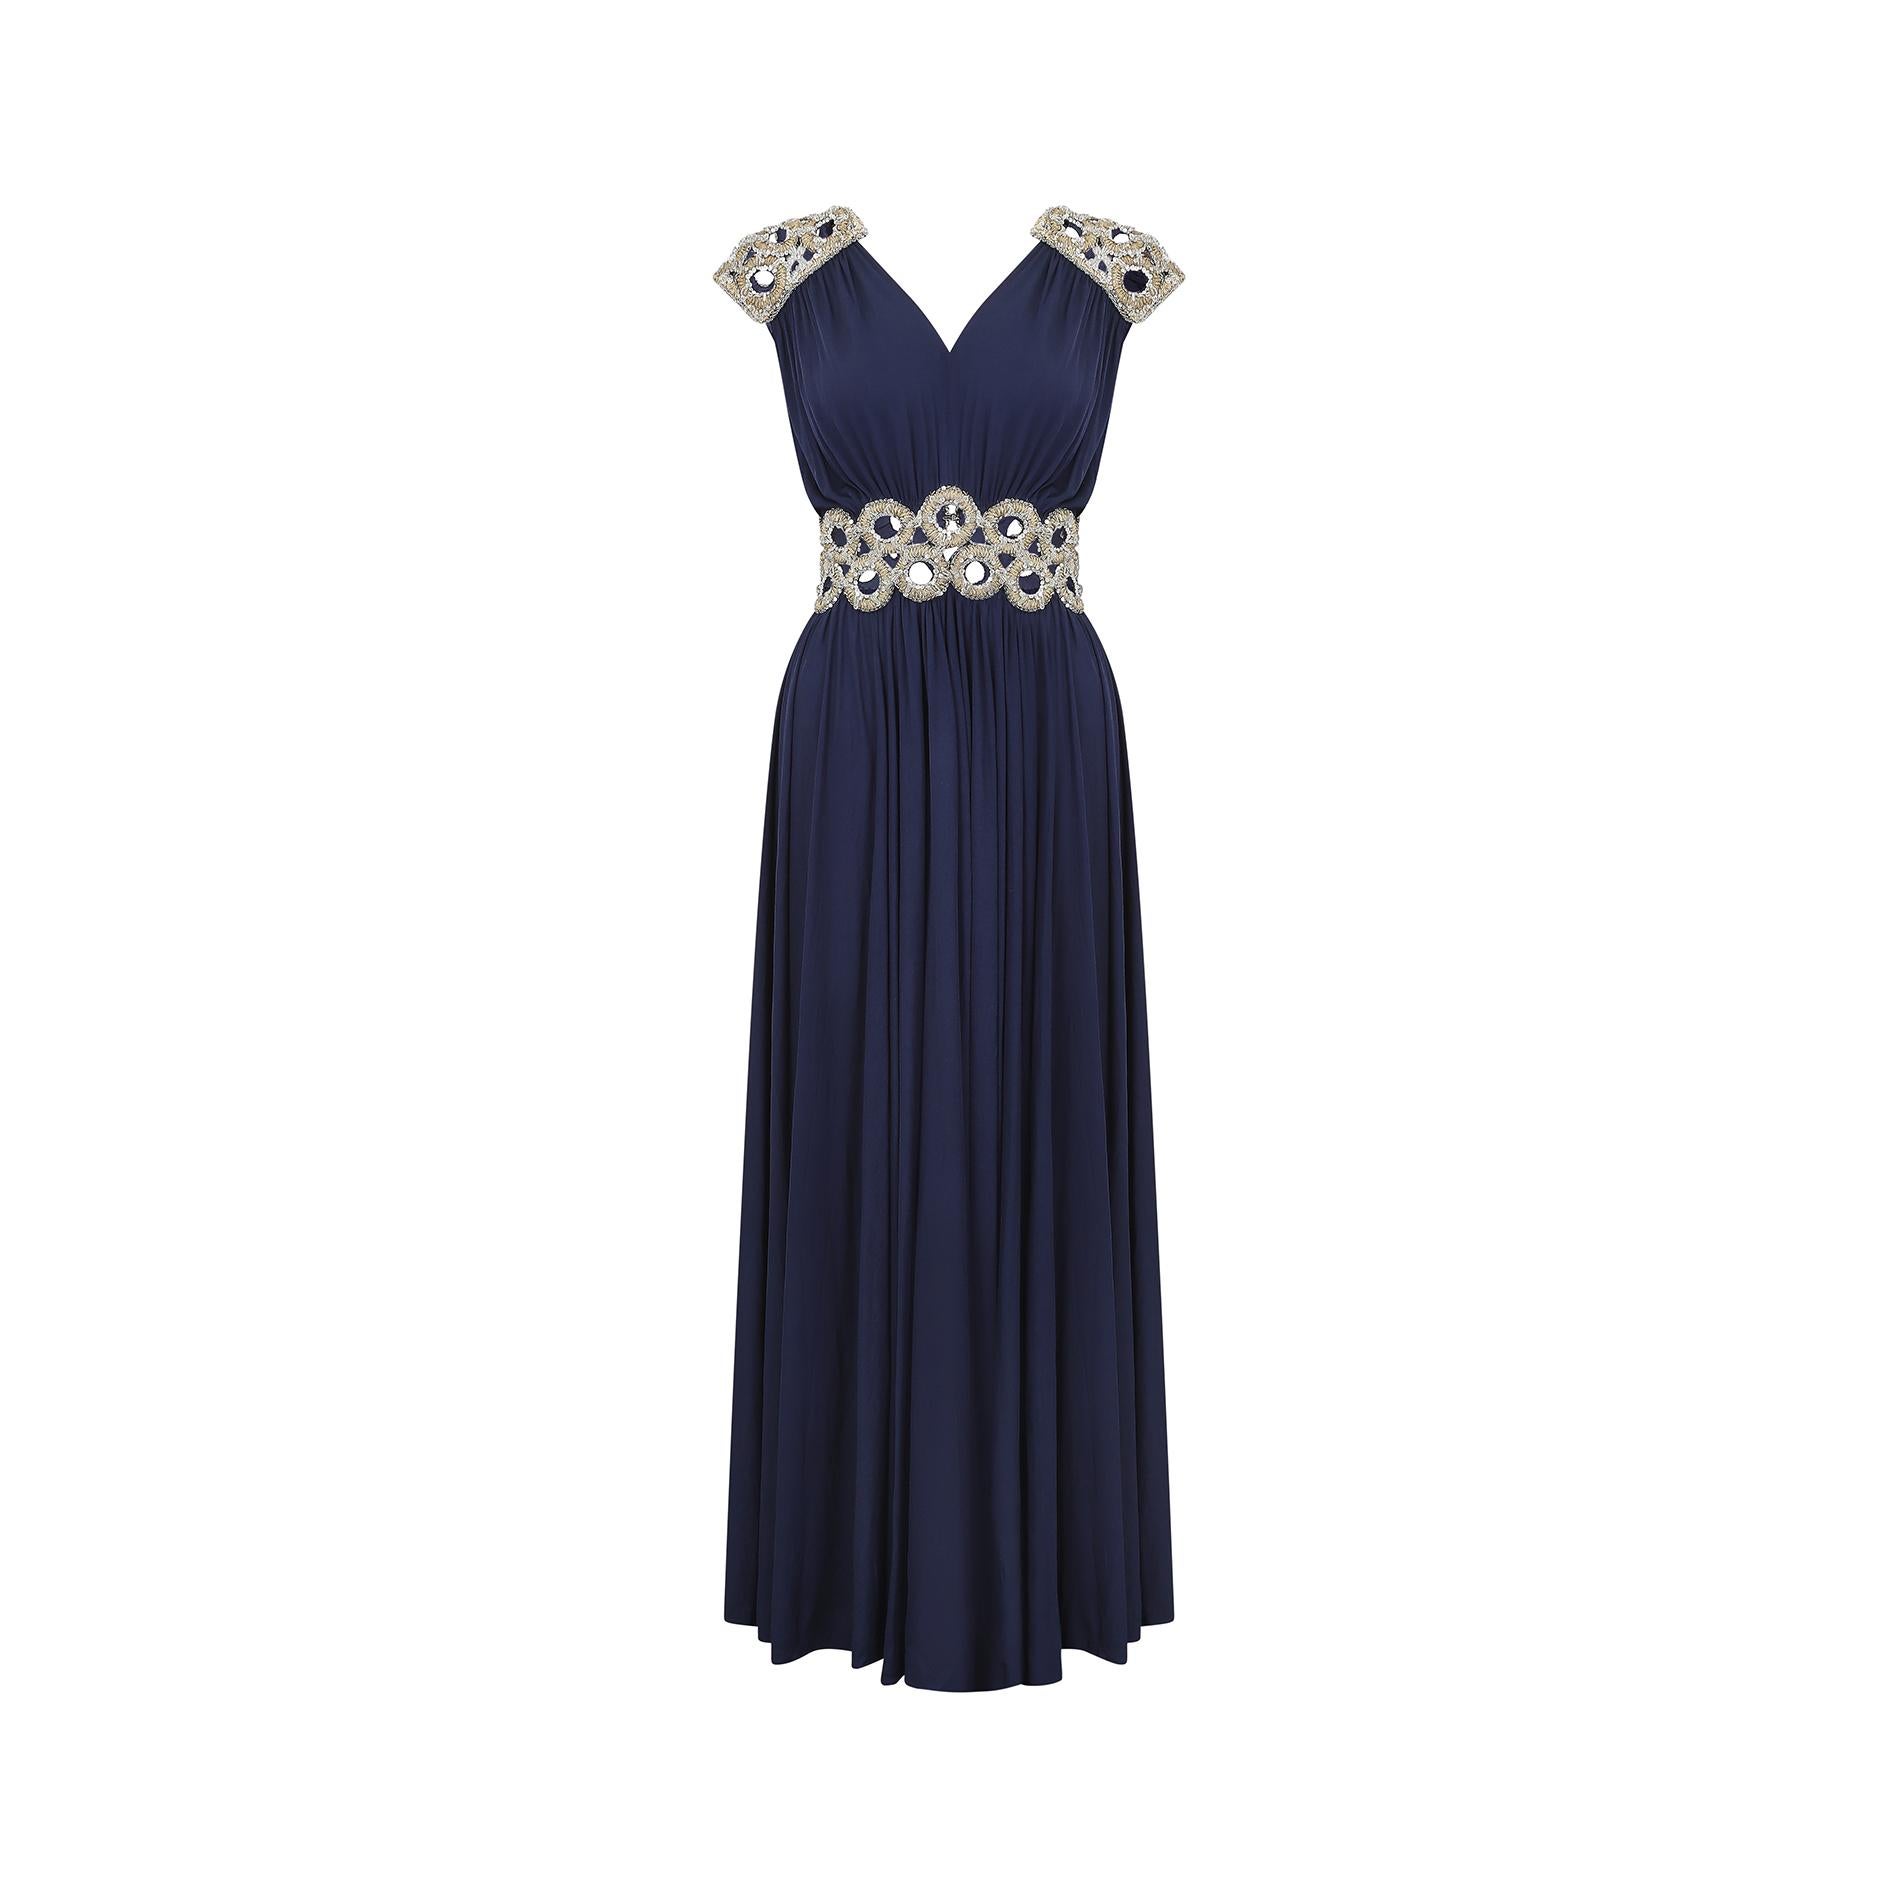 This mid to late 1970s navy and sequin detail Grecian dress is a show stopping unlabelled couture piece.  It is skilled work and has mostly been made by hands trained in haute couture techniques.  The designer that immediately springs to mind is